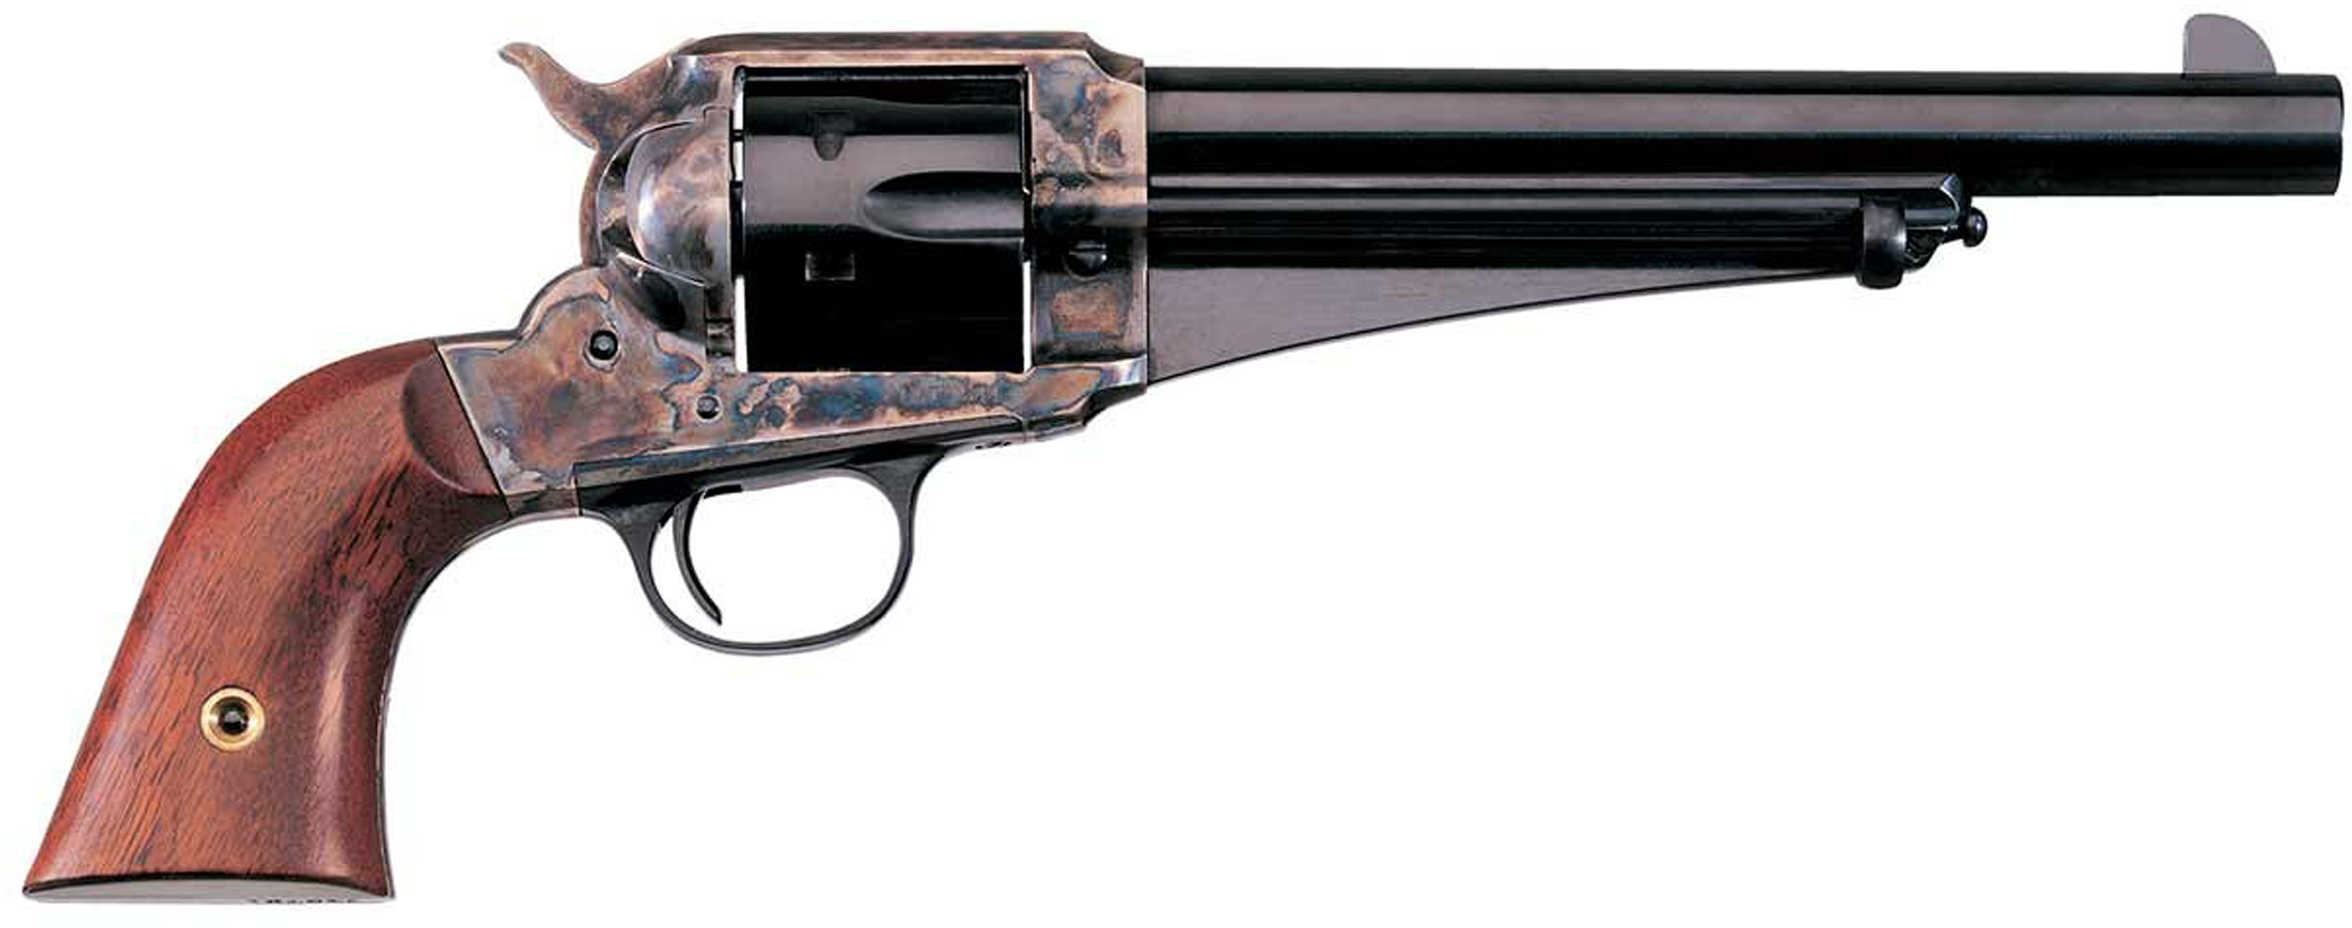 Taylor's & Company Revolver SA 1875 Army Outlaw 357 Magnum Case Hardened Frame 7.5" Barrel 6 Round